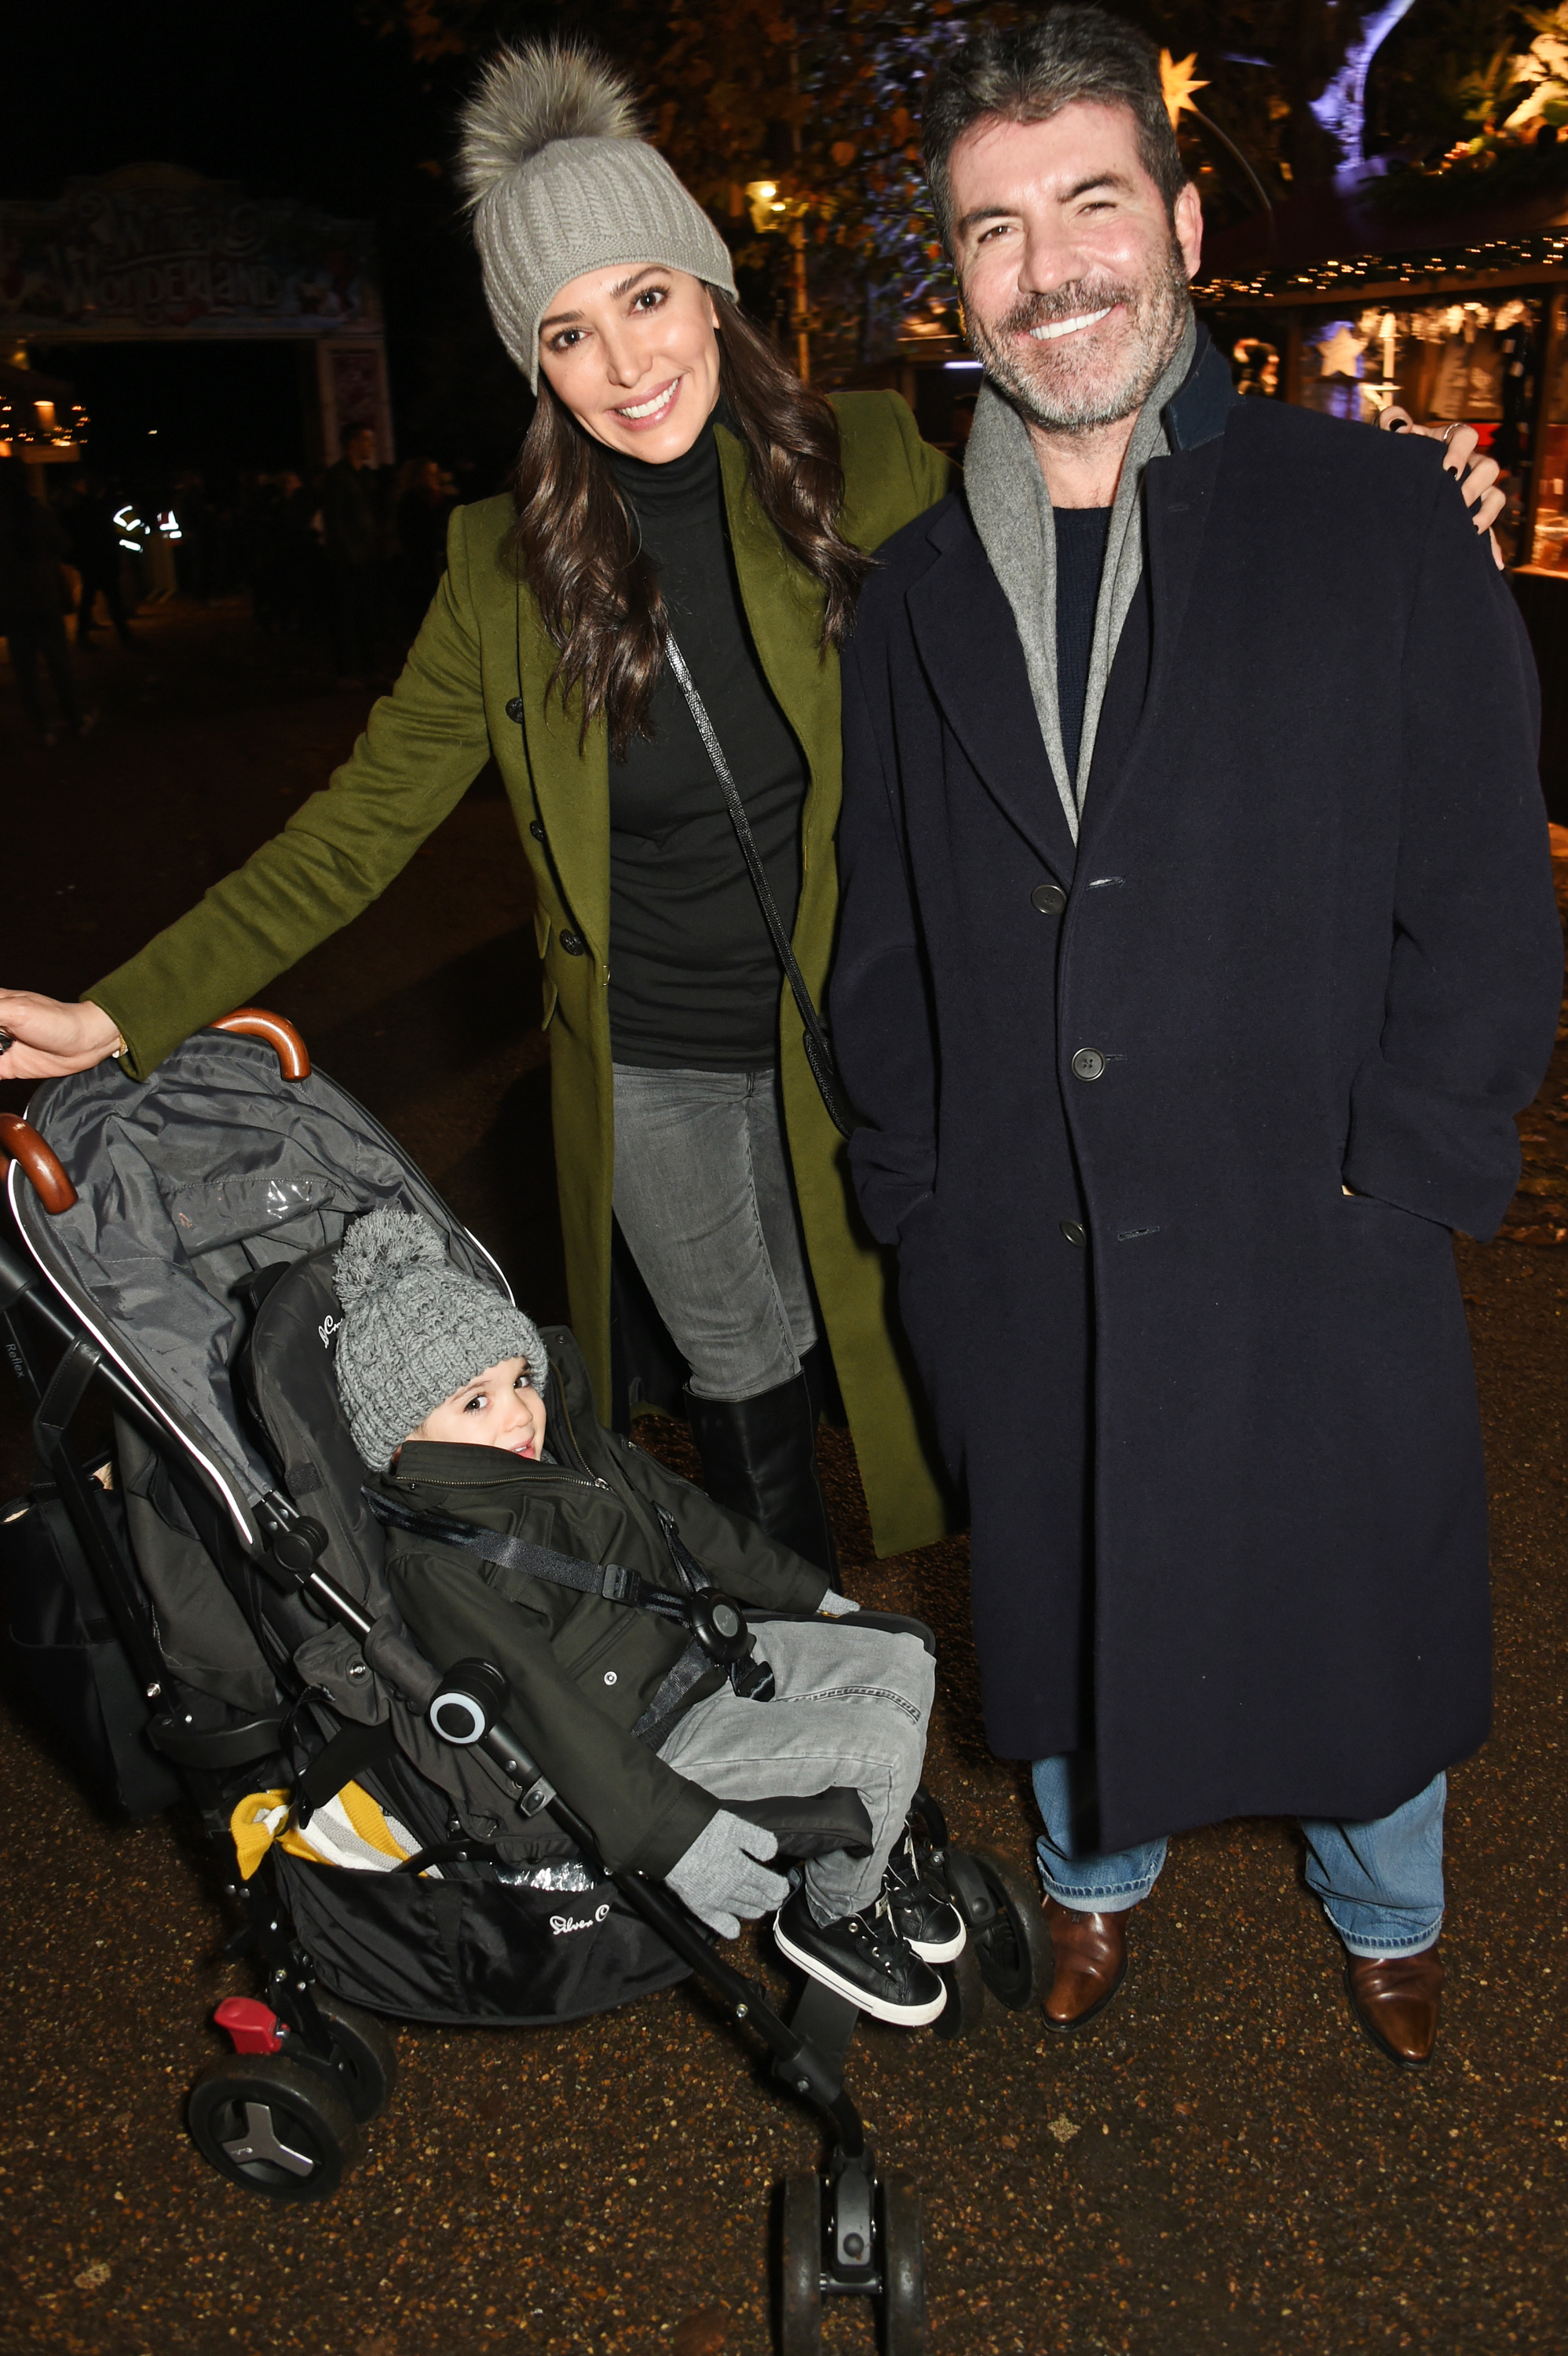 Eric Cowell, Lauren Silverman, and Simon Cowell at a VIP preview of Hyde Park's Winter Wonderland on November 17, 2016, in London, United Kingdom | Source: Getty Images